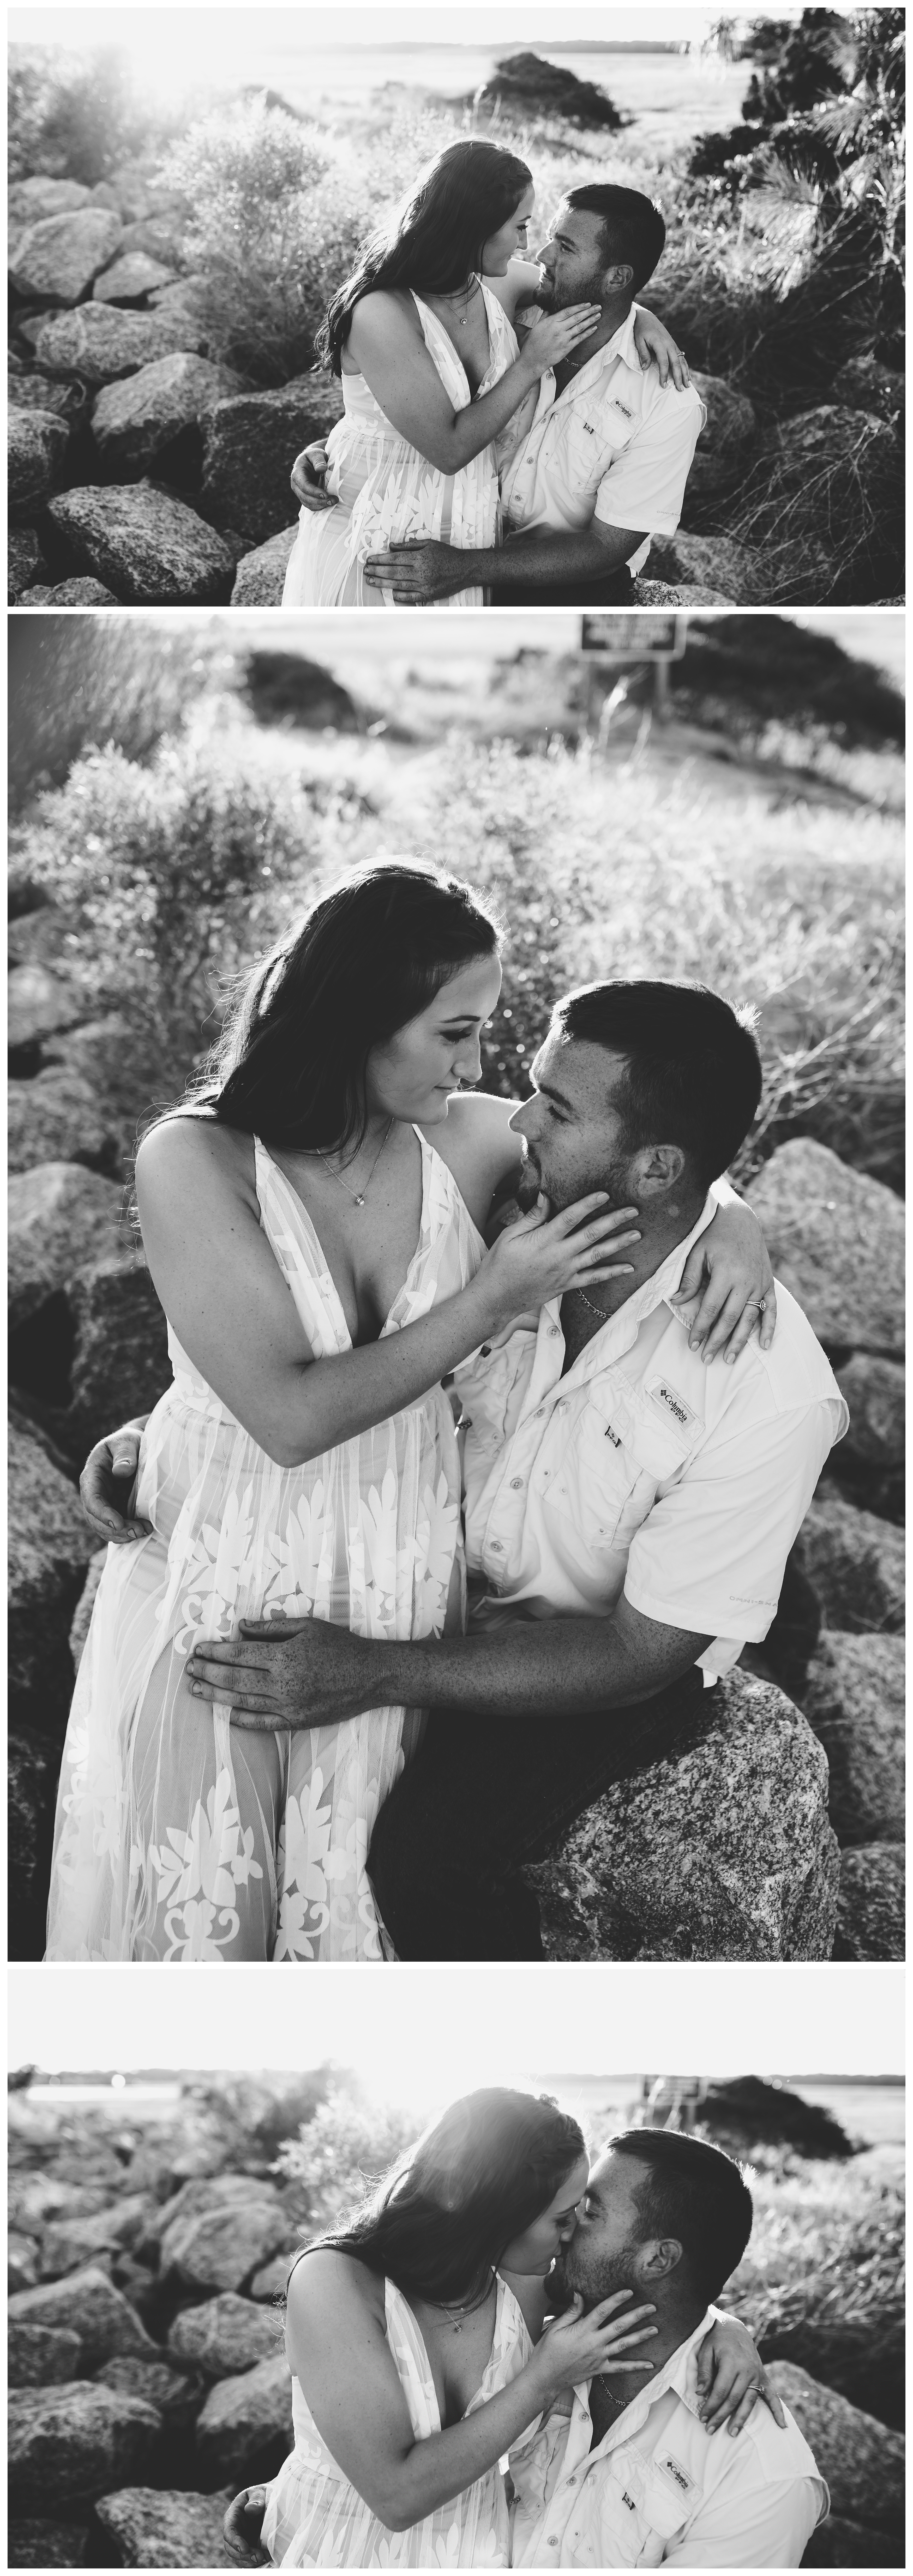 Intimate couples photos taken by professional photographer. Shelly Williams Photography